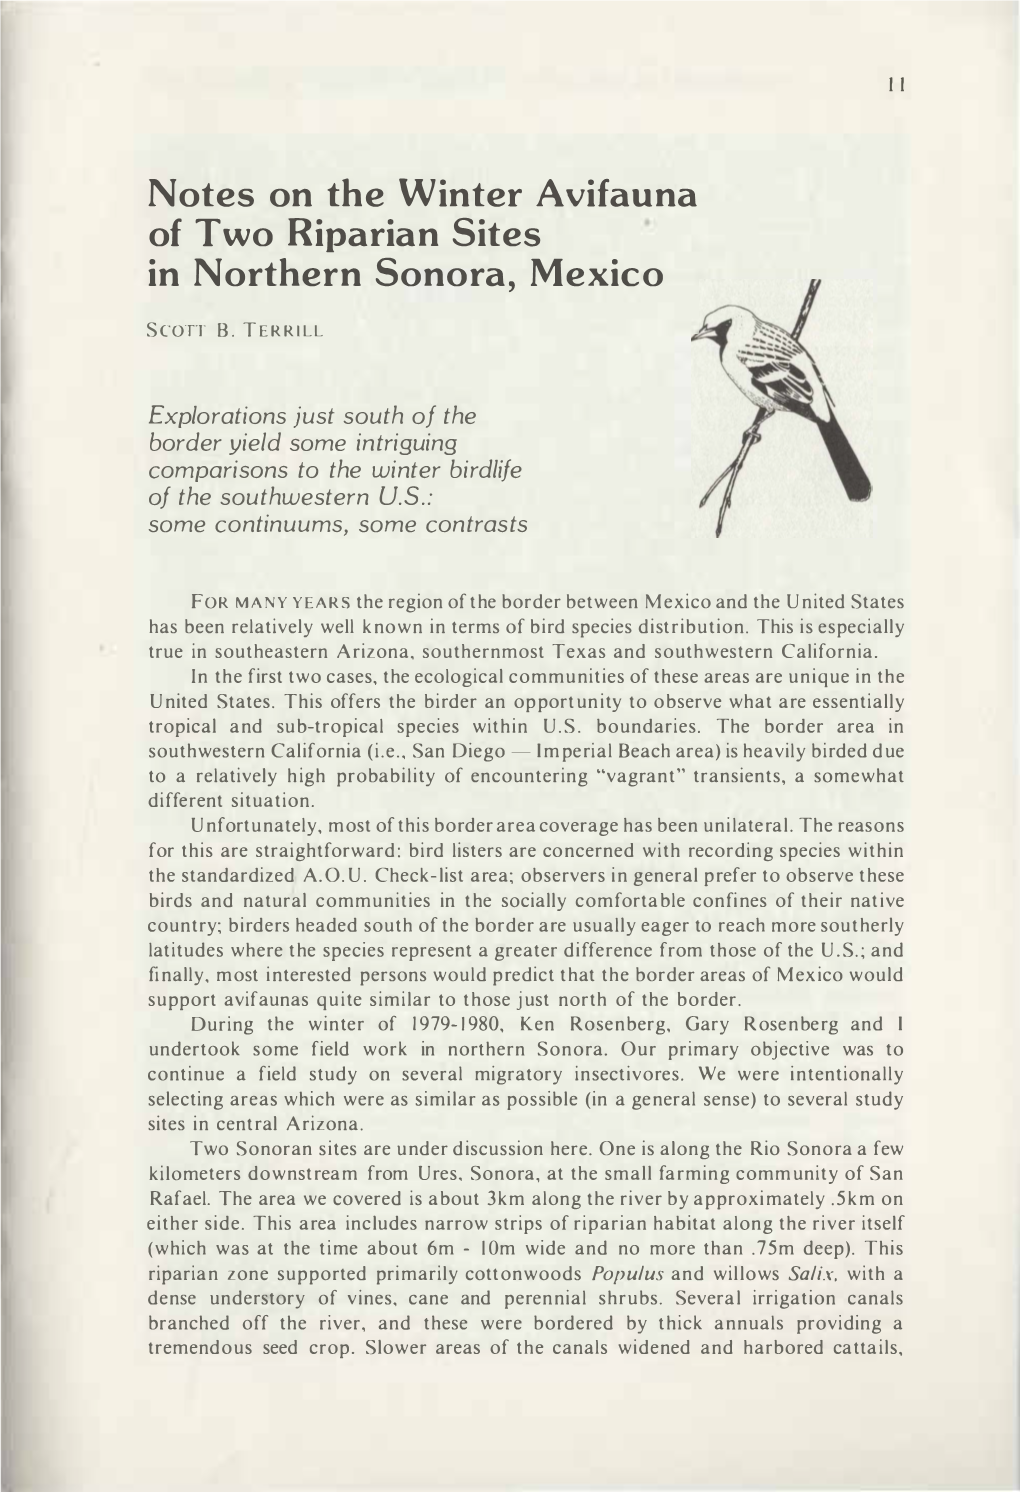 Notes on the Winter Avifauna of Two Riparian Sites in Northern Sonora, Mexico